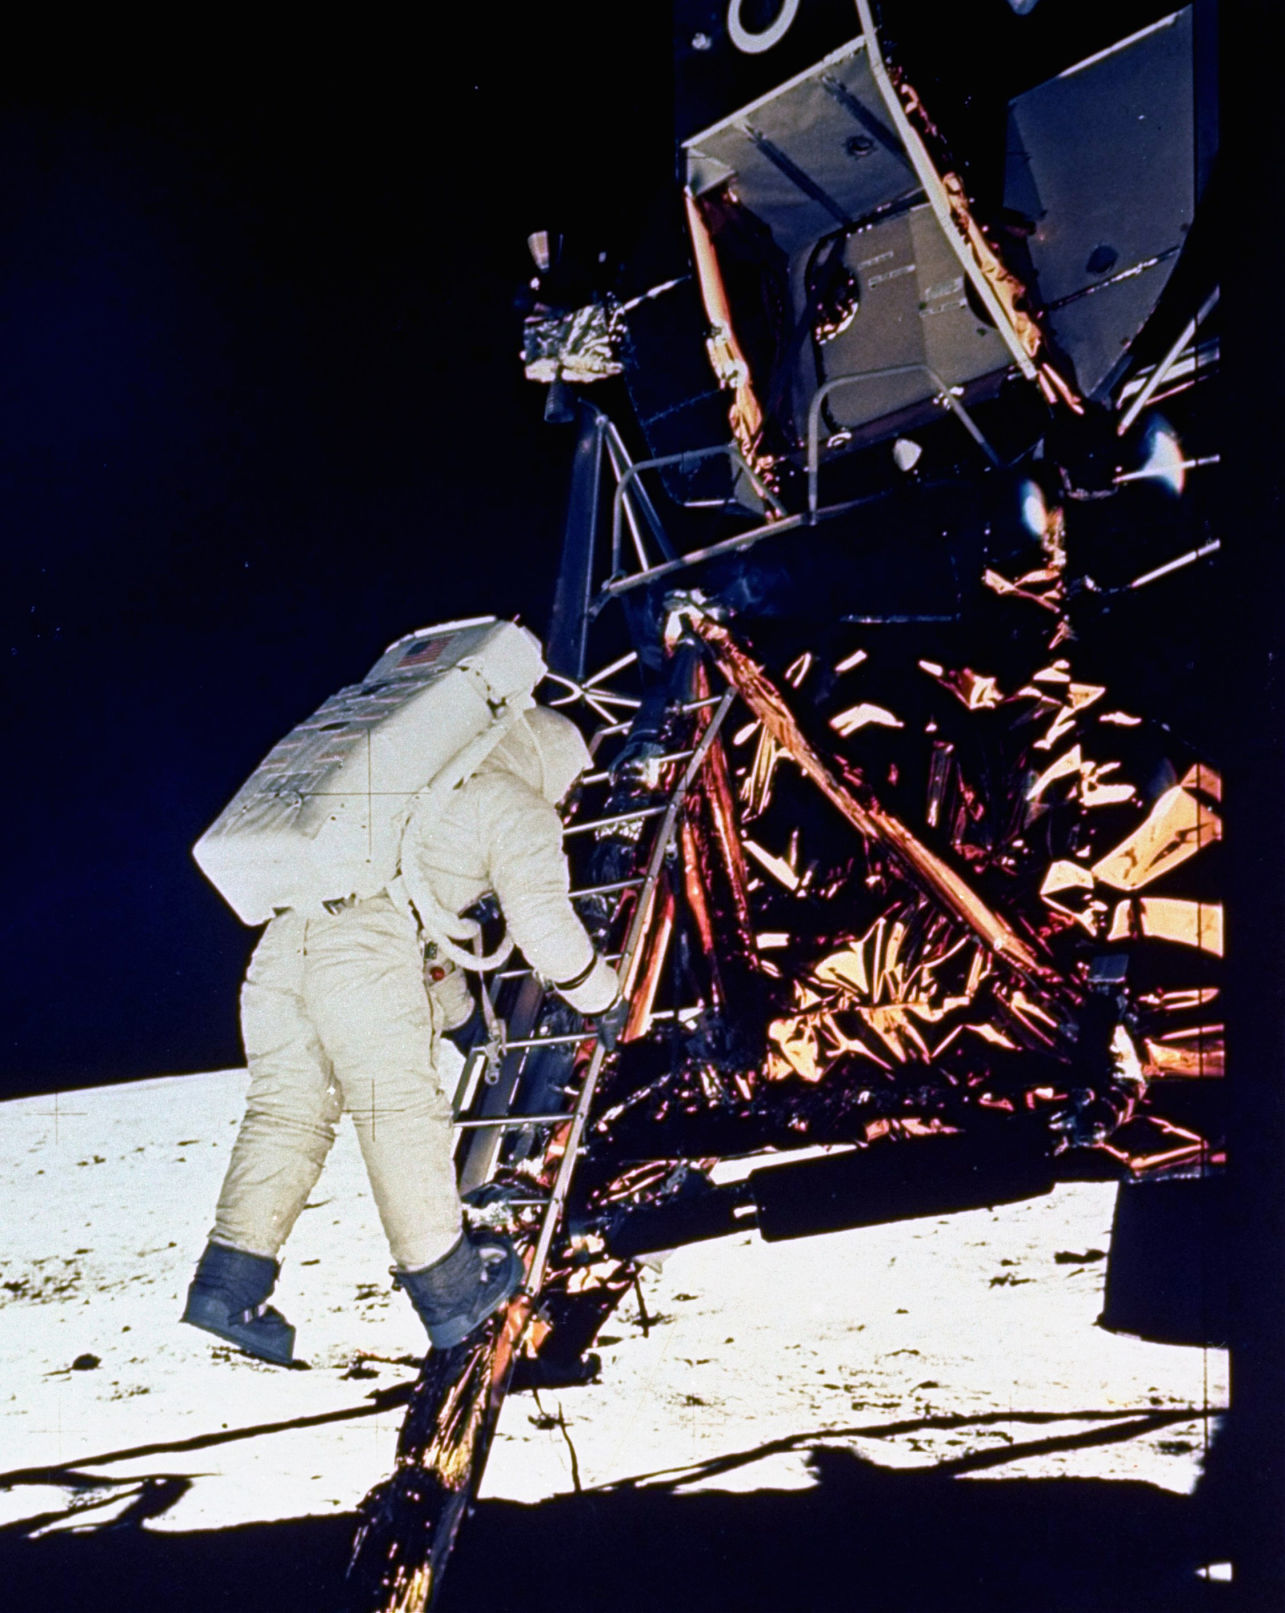 Armstrong on the moon. Аполлон 11 1969. Apollo 11 Lunar Lander.